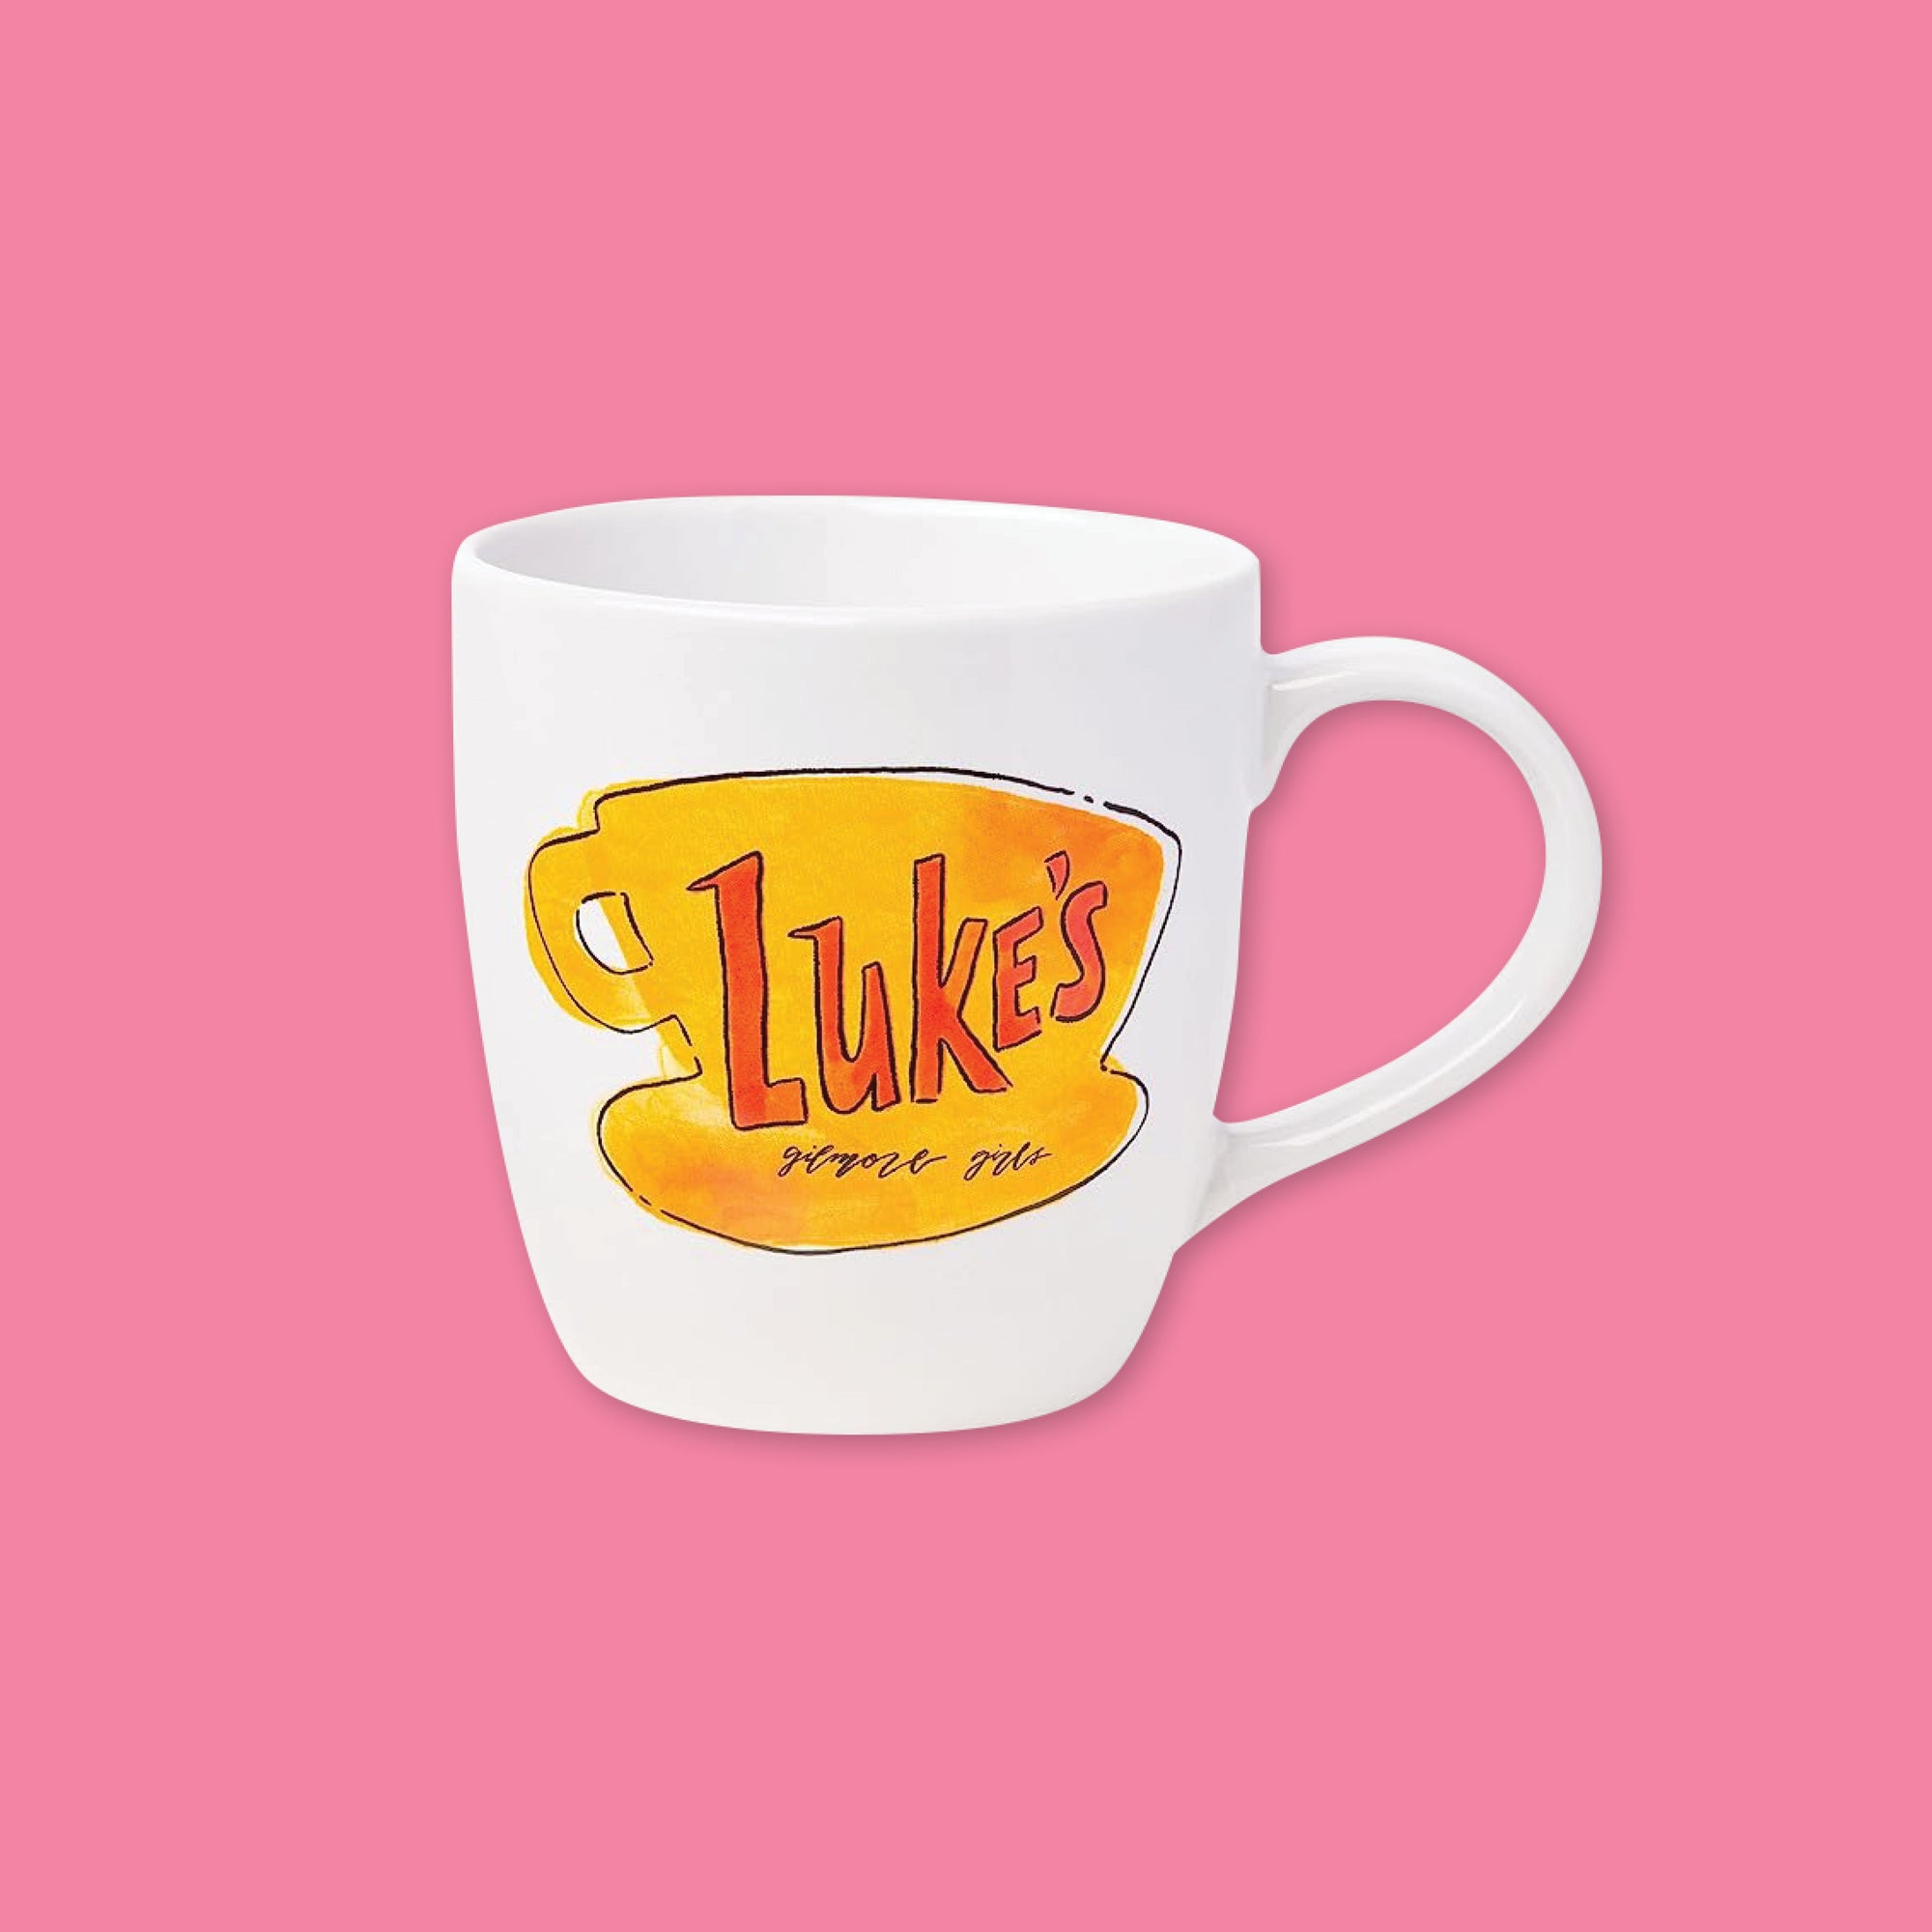 On a bubblegum pink background is a bistro-style, white mug with a Gilmore Girls-inspired "Luke's" watercolor illustration in red and yellows.